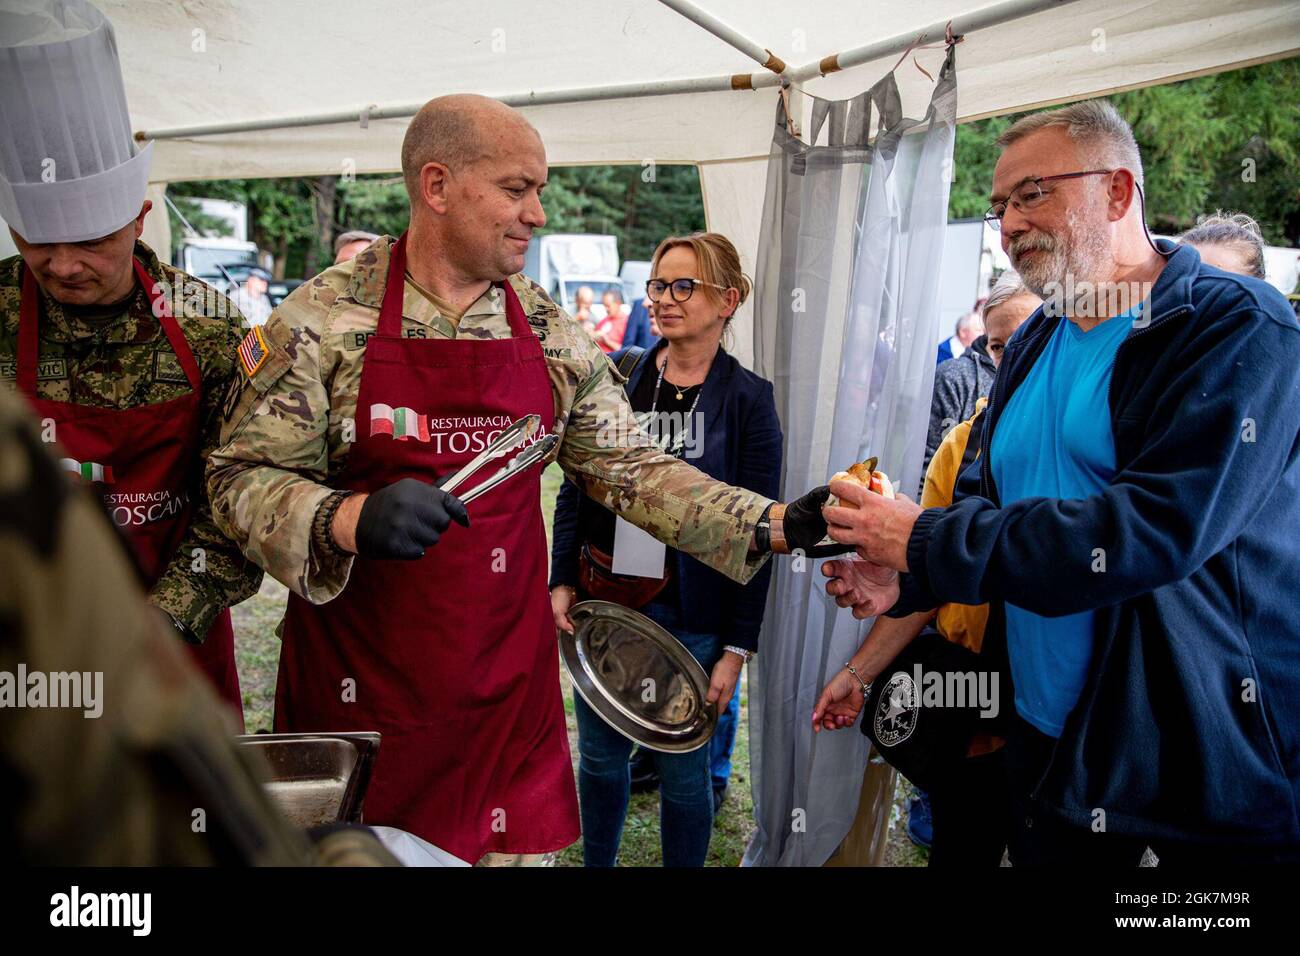 U.S. Army Lt. Col. Craig Broyles, commander of Battle Group Poland, hands a fish burger to a local citizen during the Days of Orzsyz festival in Orzysz, Poland, August 27, 2021. Battle Group Poland's leaders joined the local community to celebrate the Days of Orzysz, strengthening our partnership. Stock Photo